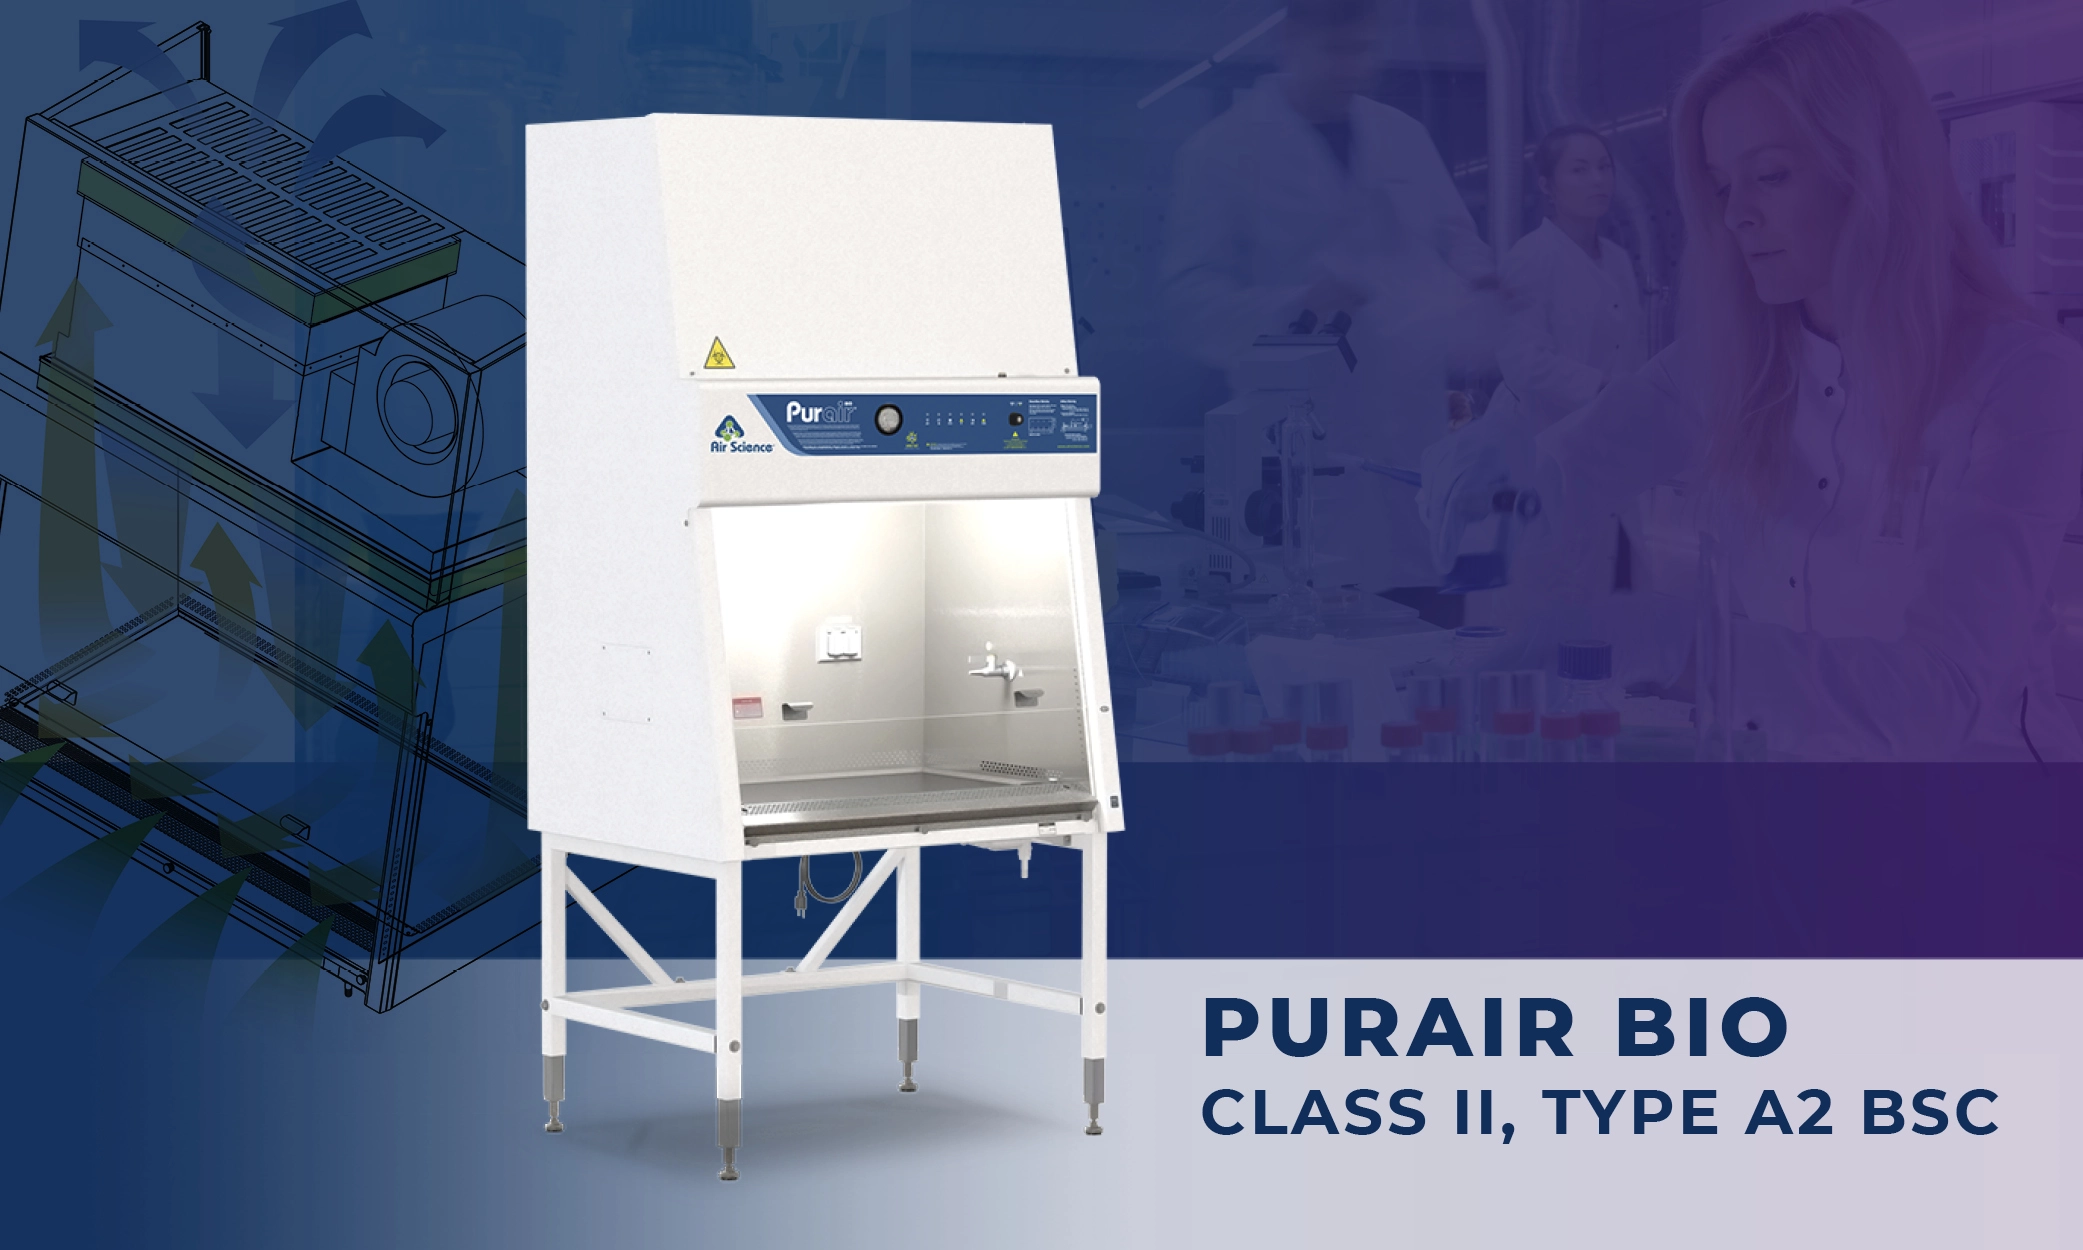 What’s the Difference Between Class II, Type A2 and B2 Biosafety Cabinets?